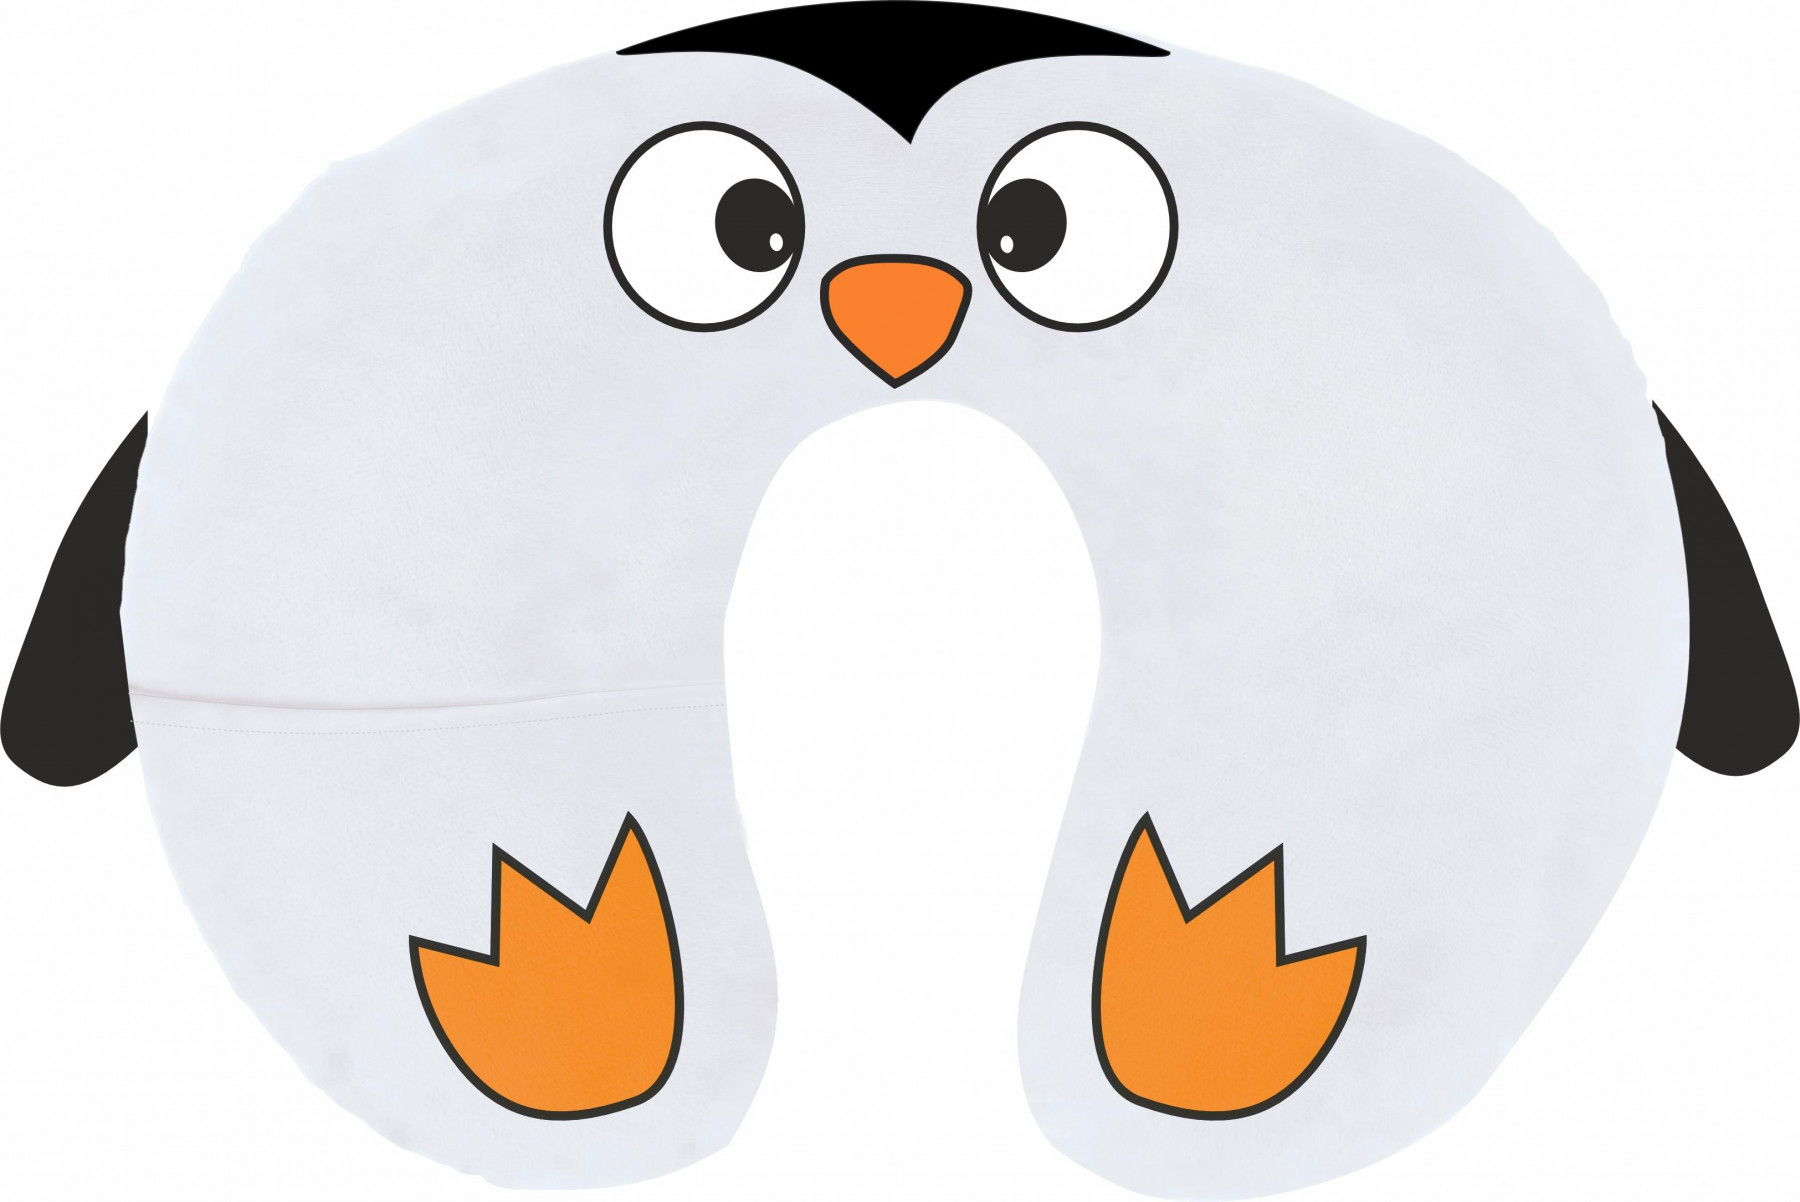 NECK PILLOW - PENGUIN OLAF - sewing set